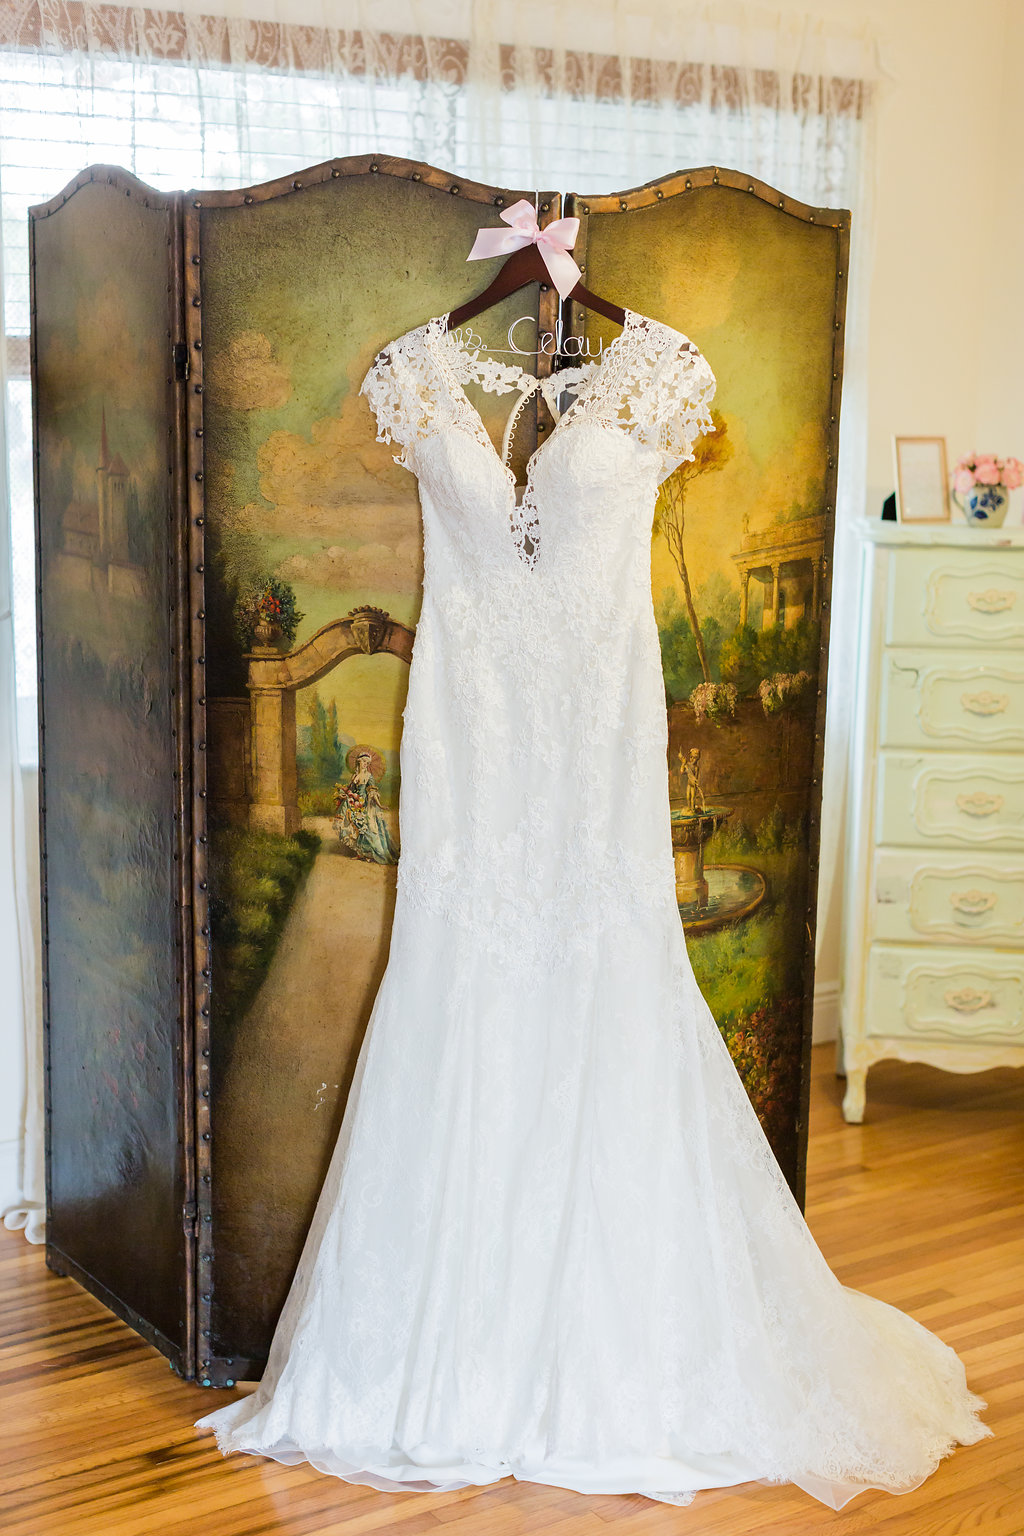 The bride's wedding dress is lace, open back, with beaded spine, lace detailing, lace cap sleeves and a low cut front